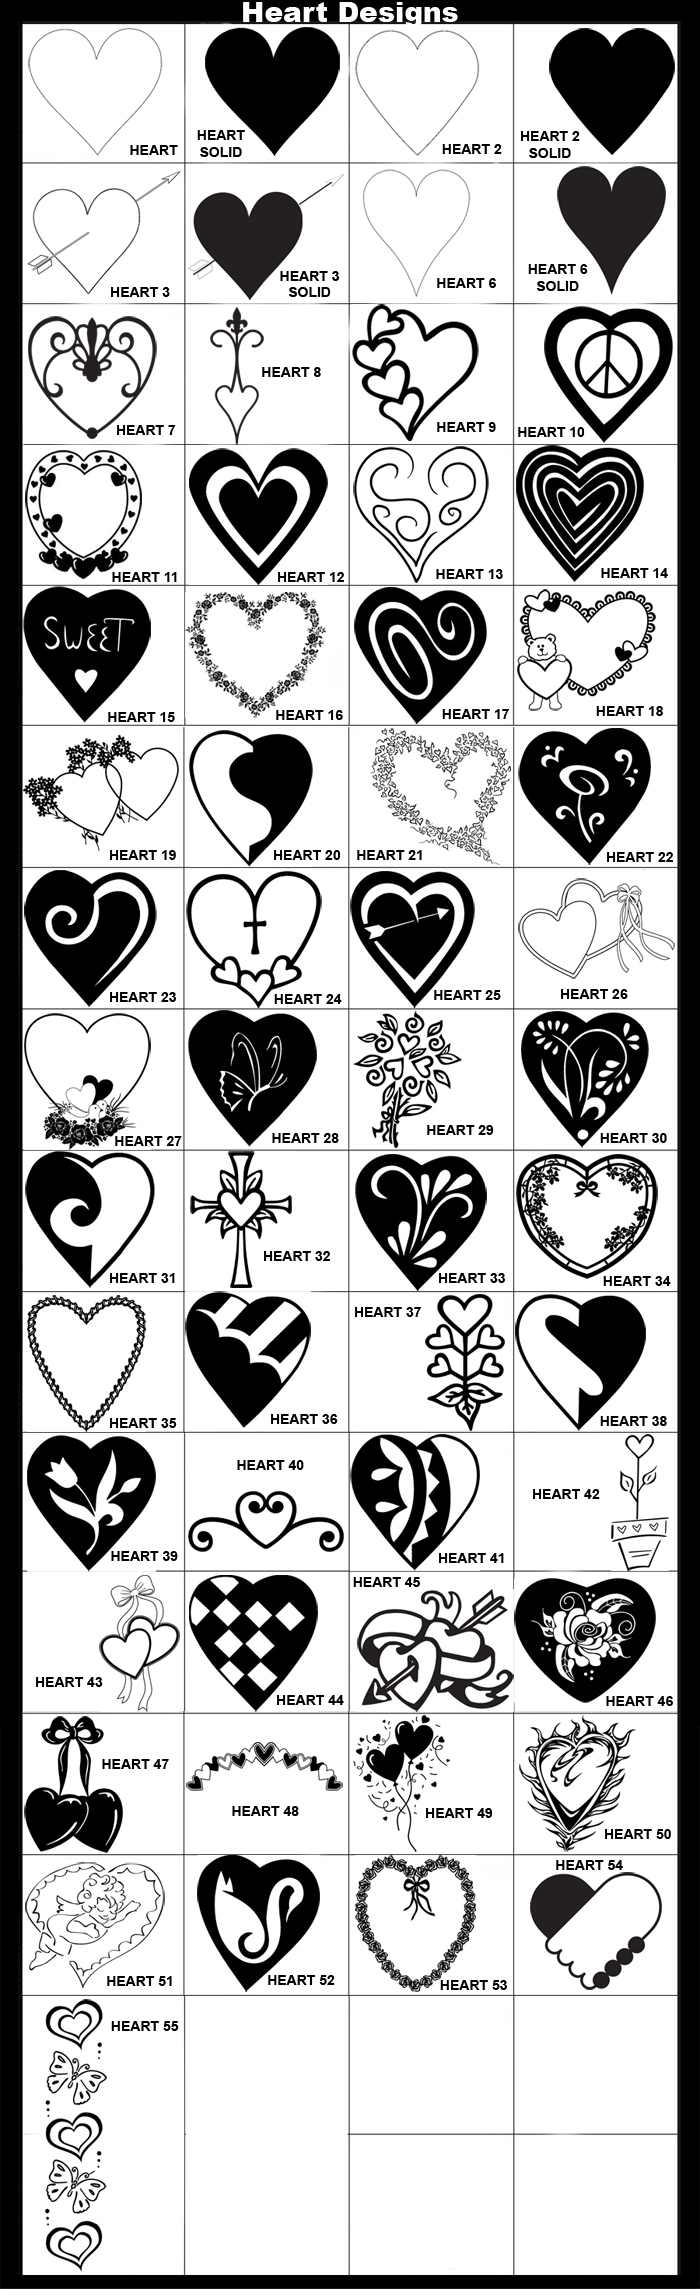 Double Hearts, Joined Hearts, Sweet, Wedding, Hearts and Flowers, Hearts and Flames, Cupid, Heart and Cross, Valentines, Bear